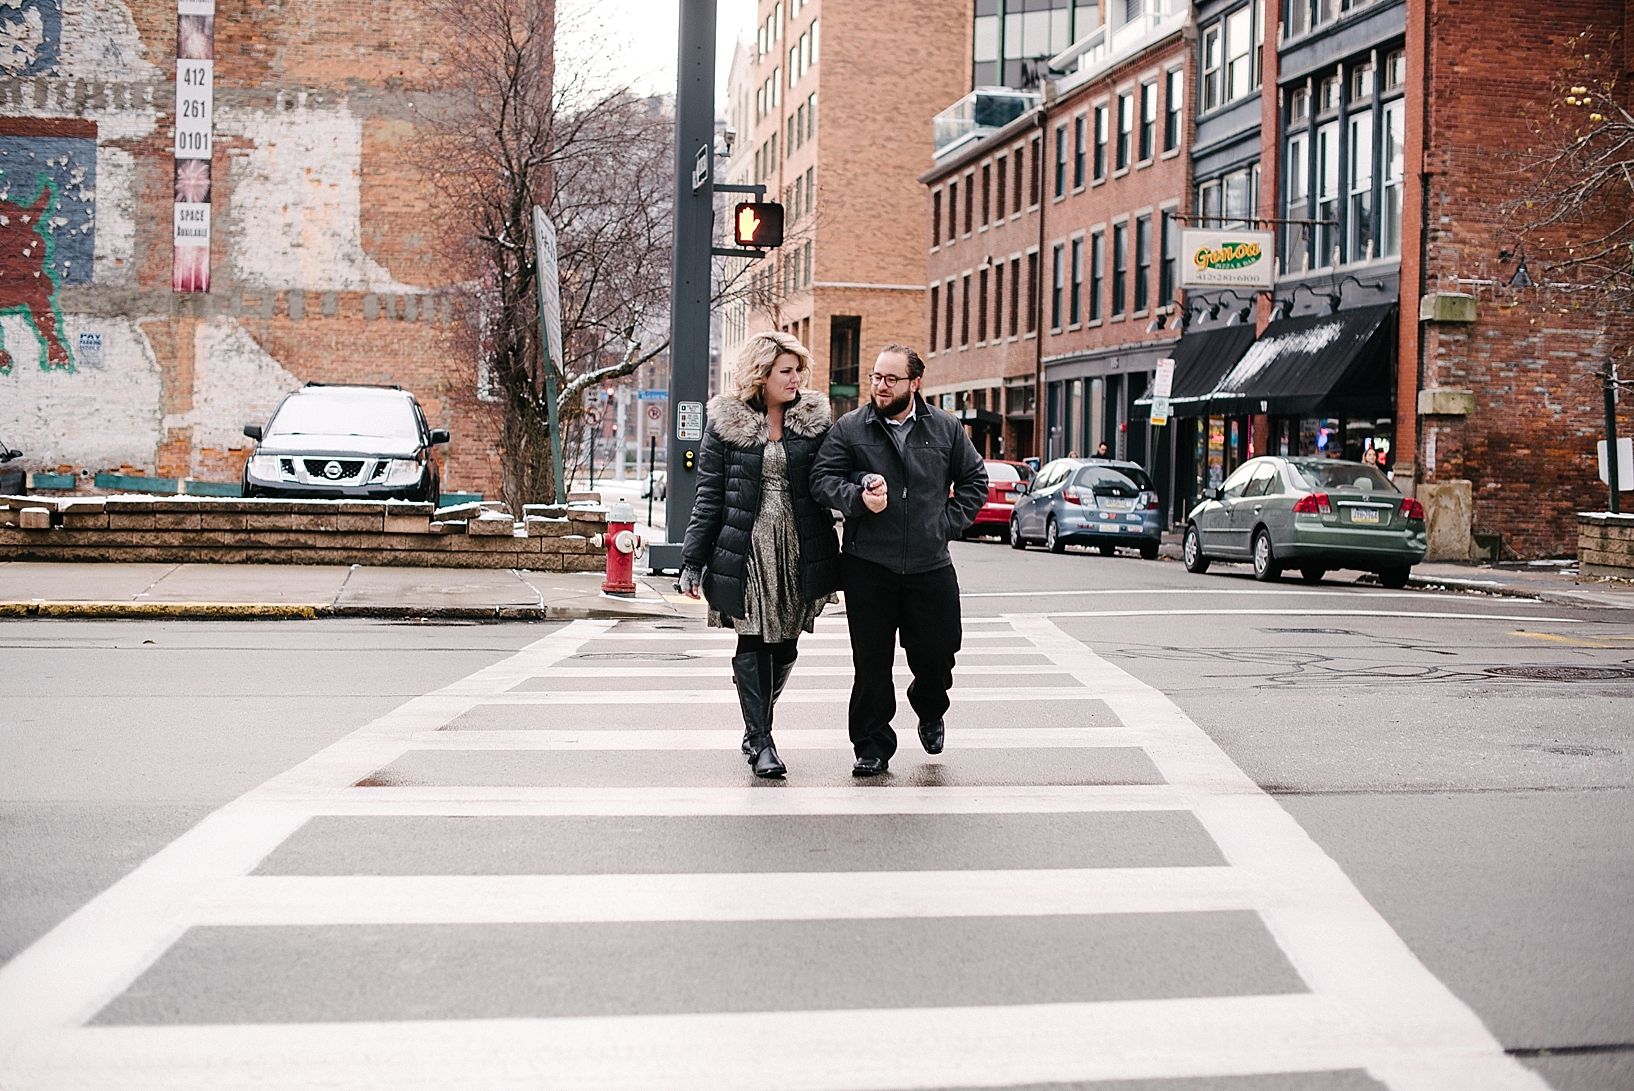 couple linking arms crossing downtown city street in winter